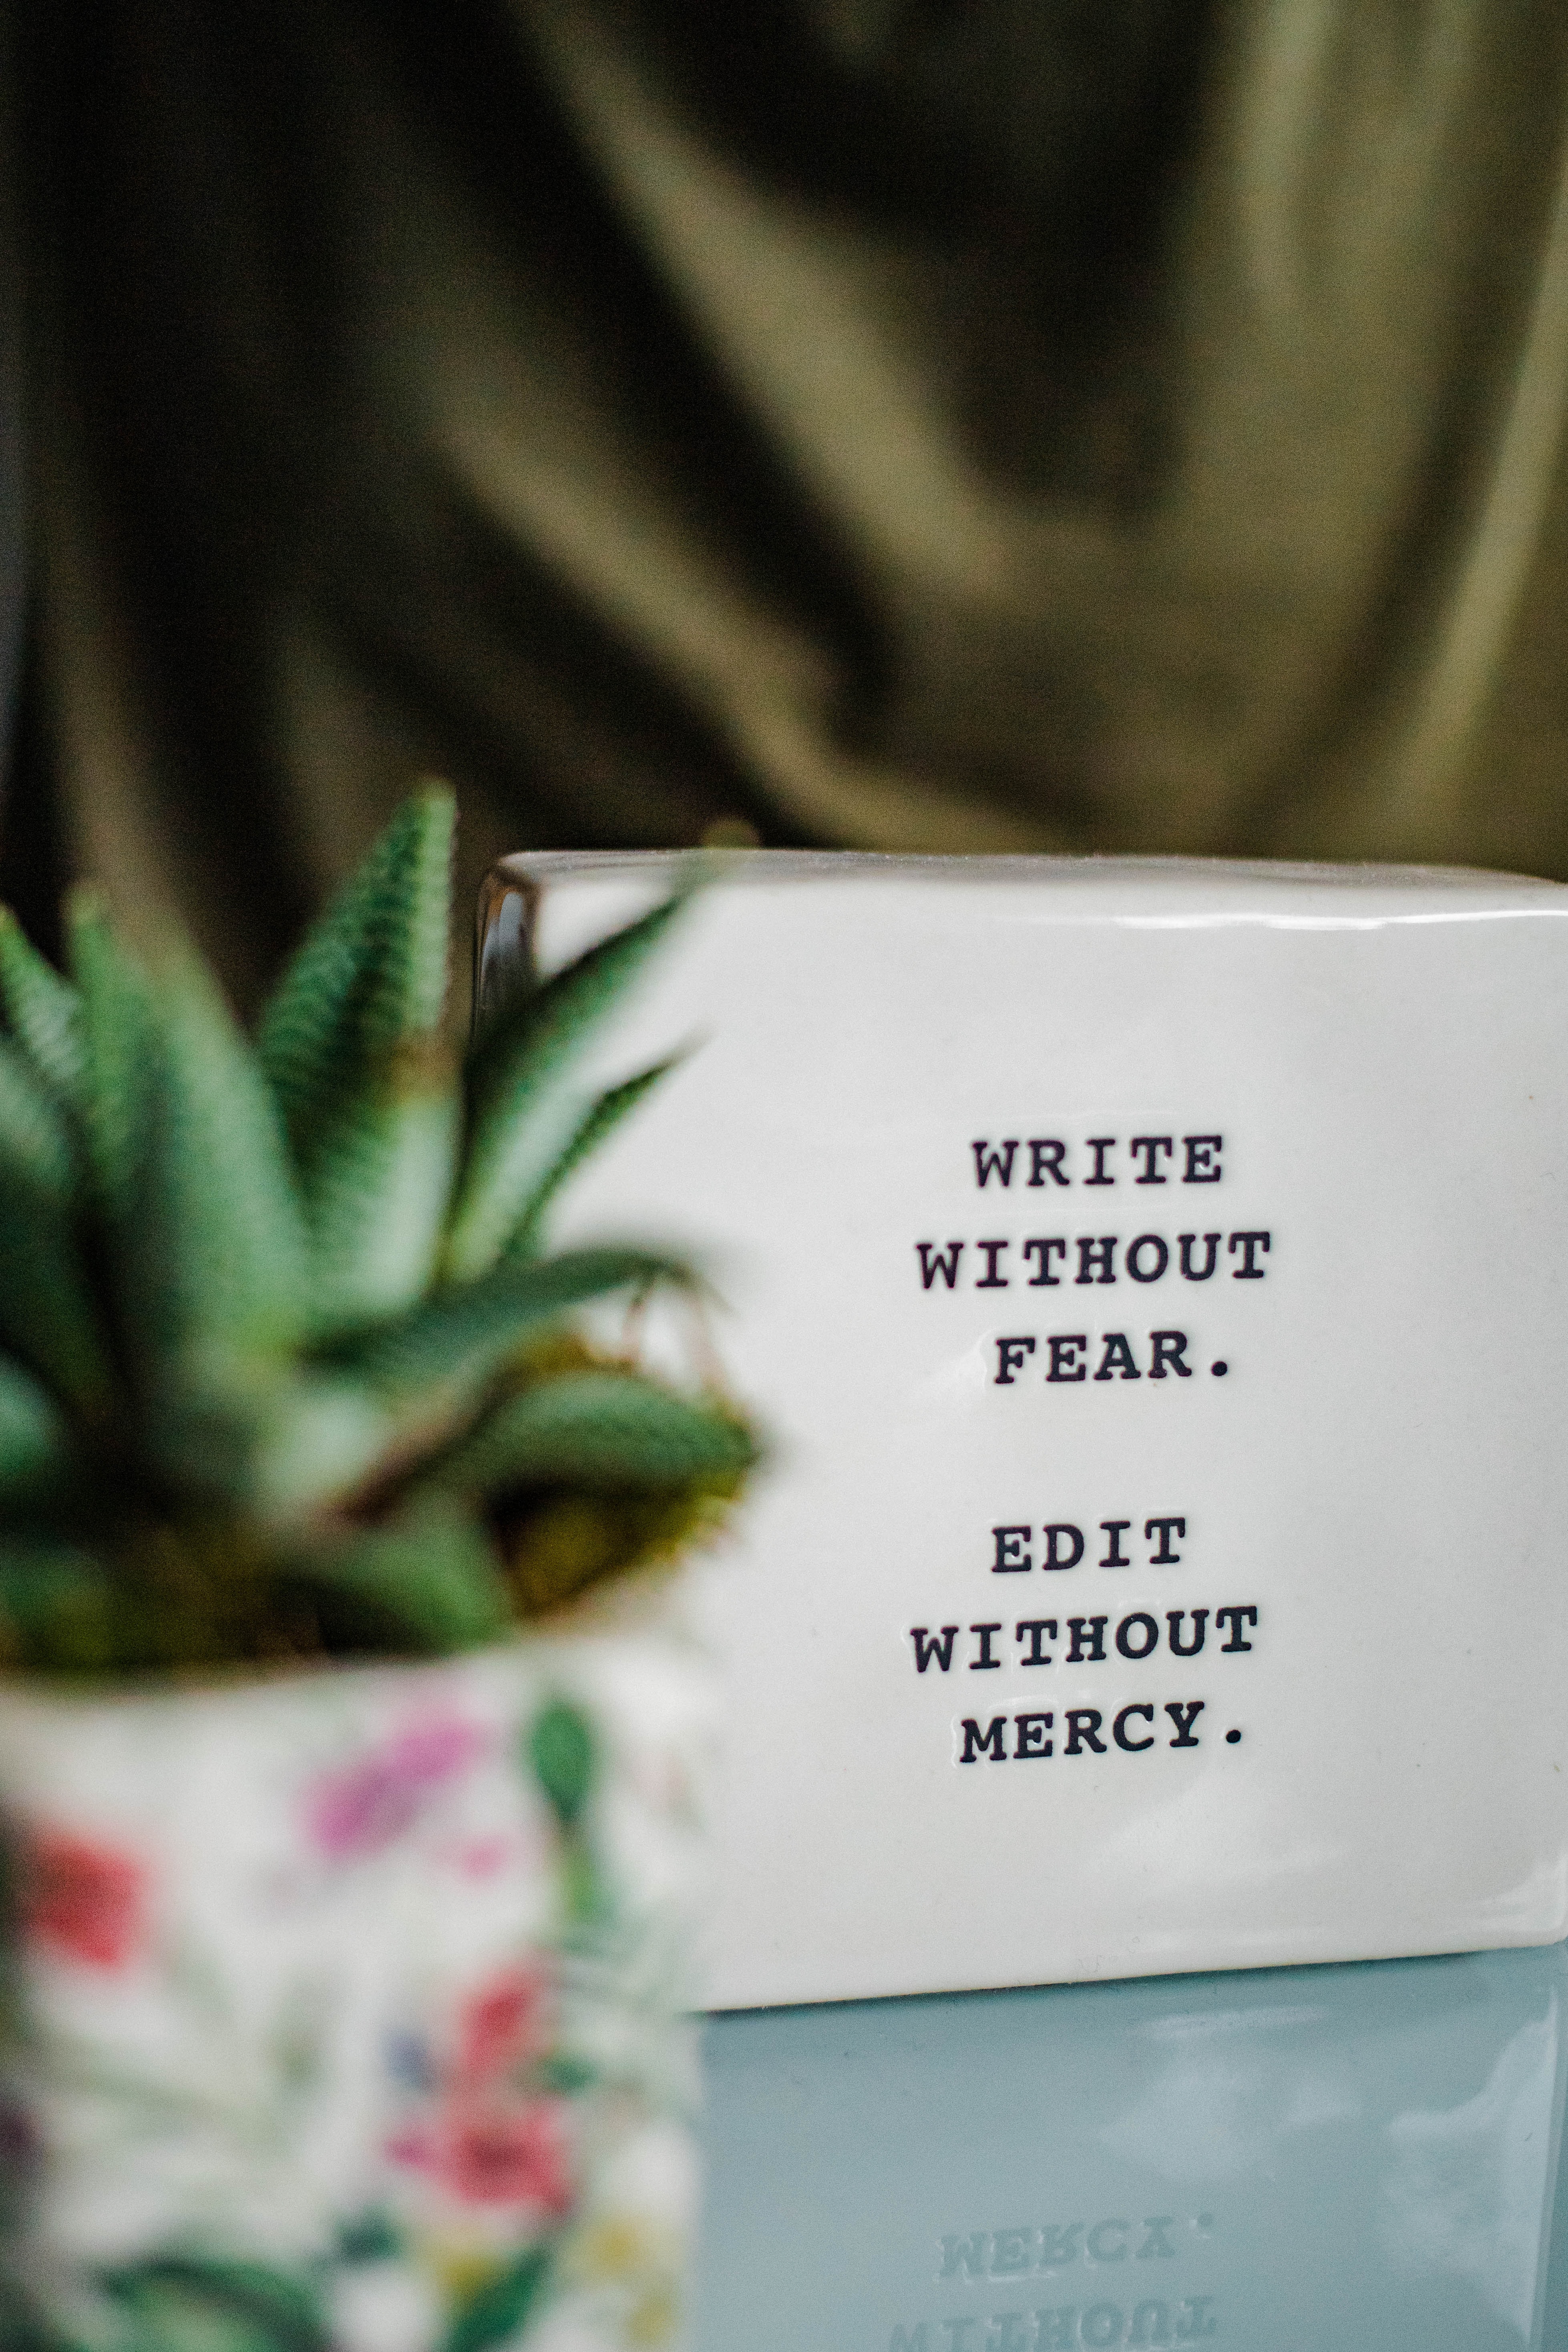 Write without fear, edit without mercy